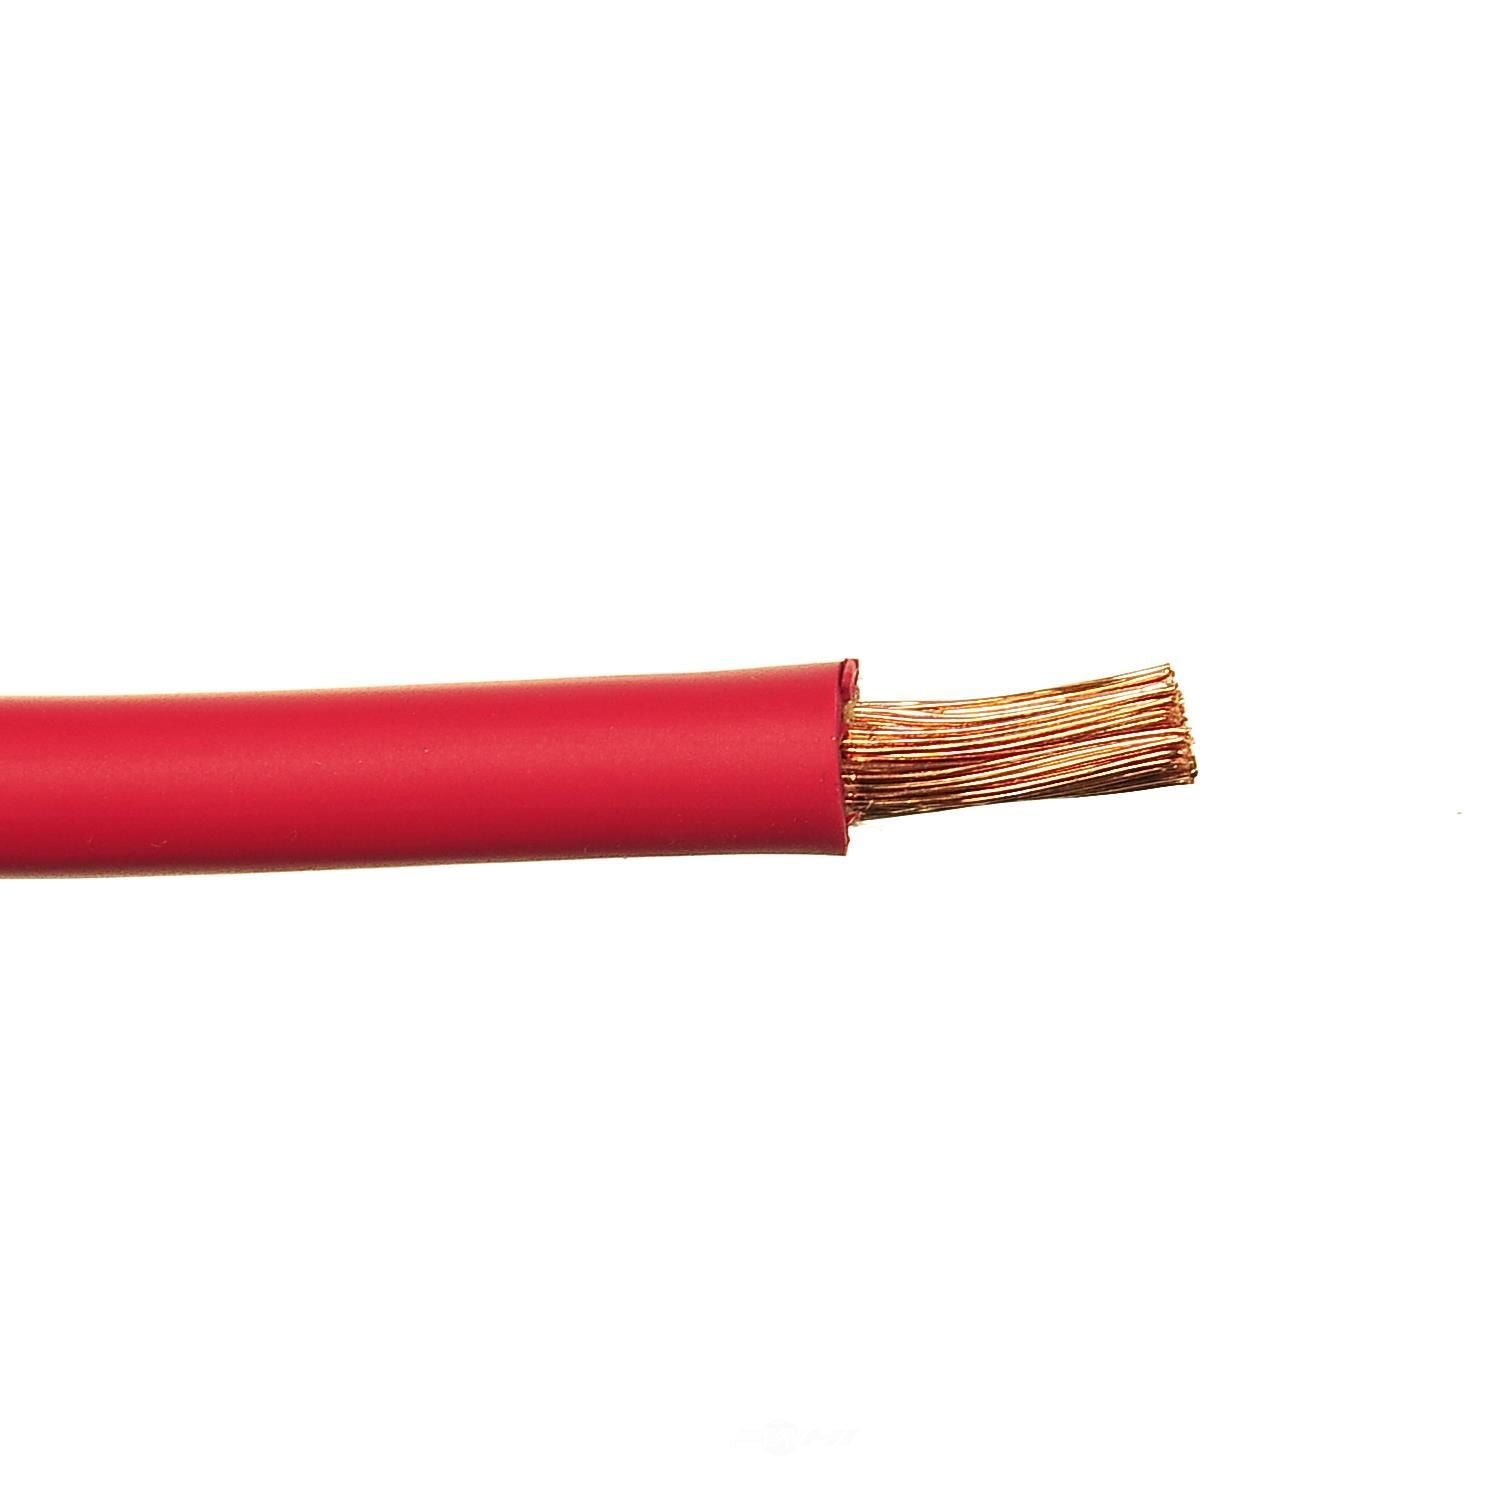 YSP CB12RD-100 Wells Bulk Cable (Red, 100', 6G)